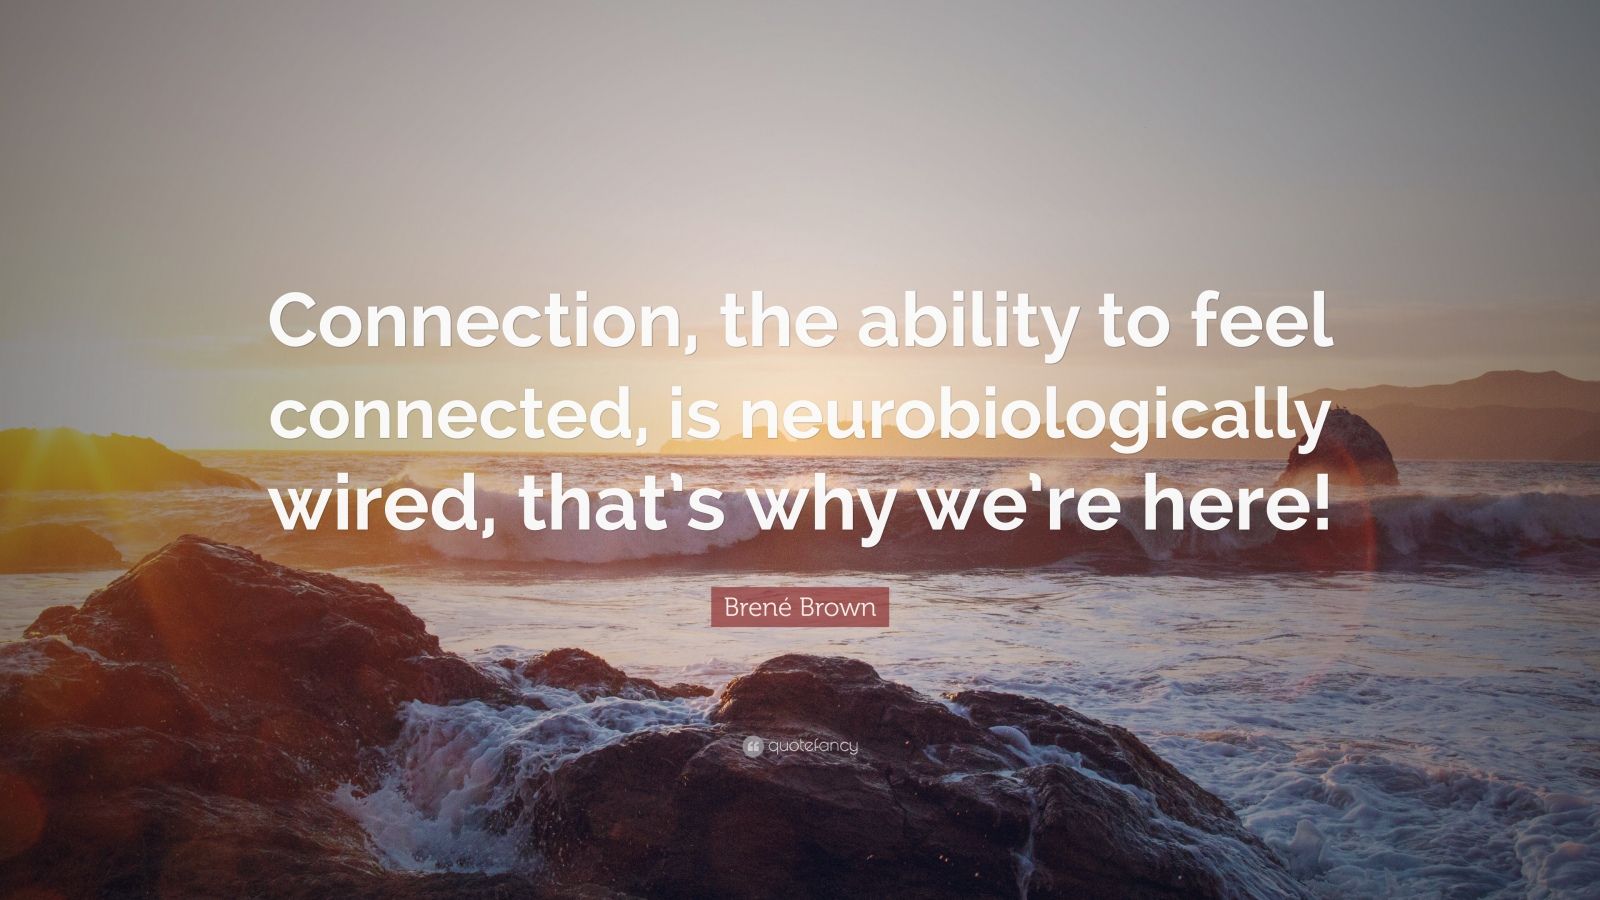 Brené Brown Quote: "Connection, the ability to feel connected, is neurobiologically wired, that ...